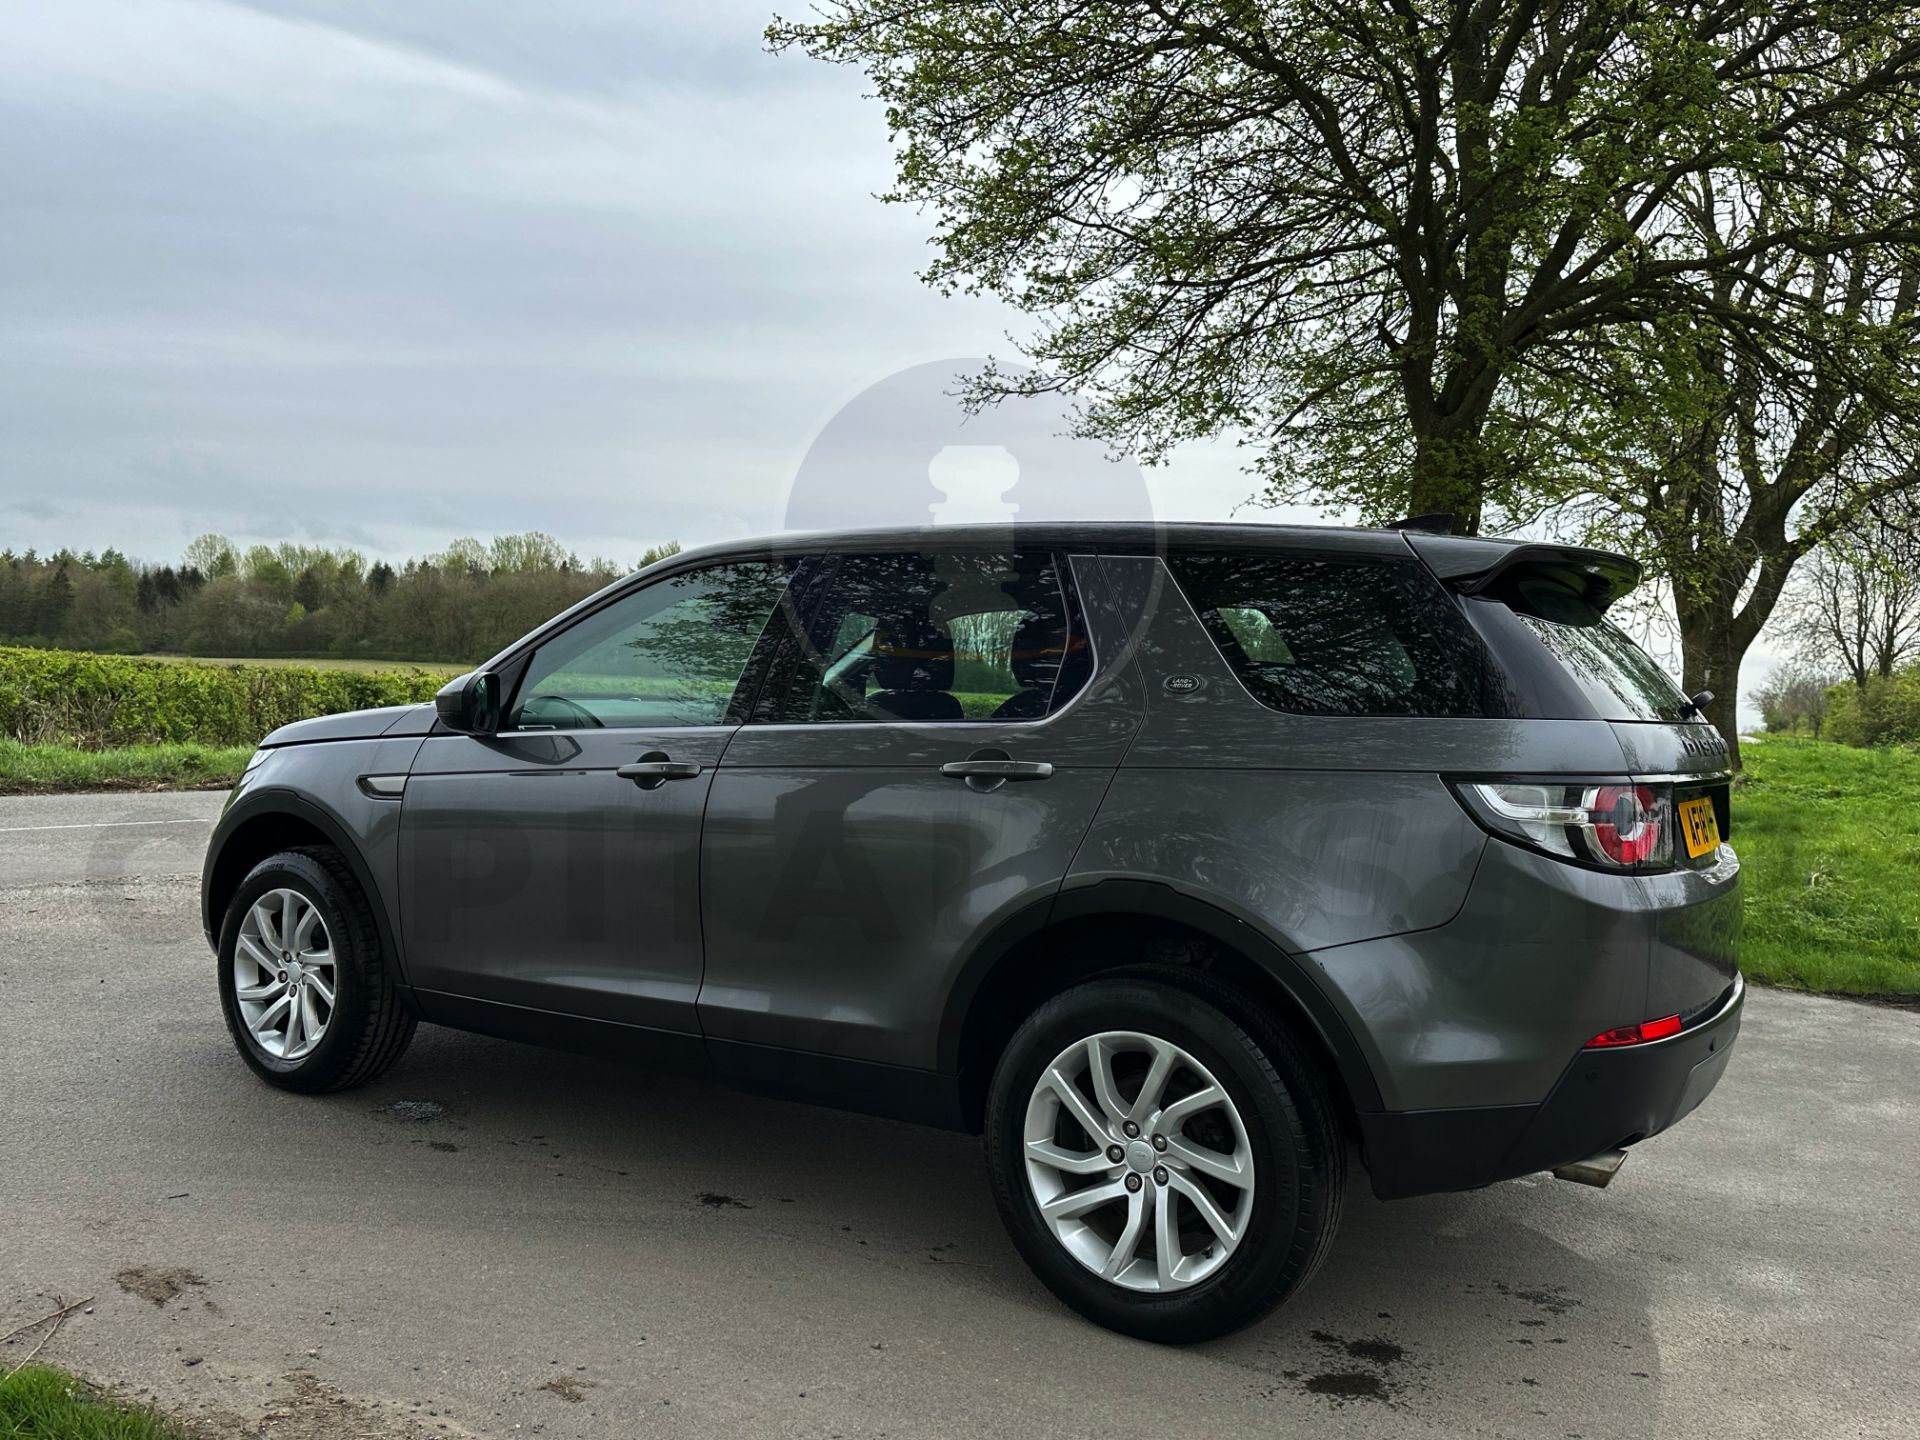 (On Sale) LAND ROVER DISCOVERY SPORT *SE TECH* 5 DOOR SUV (2018 - EURO 6) 2.0 TD4 - AUTO *HUGE SPEC* - Image 9 of 51